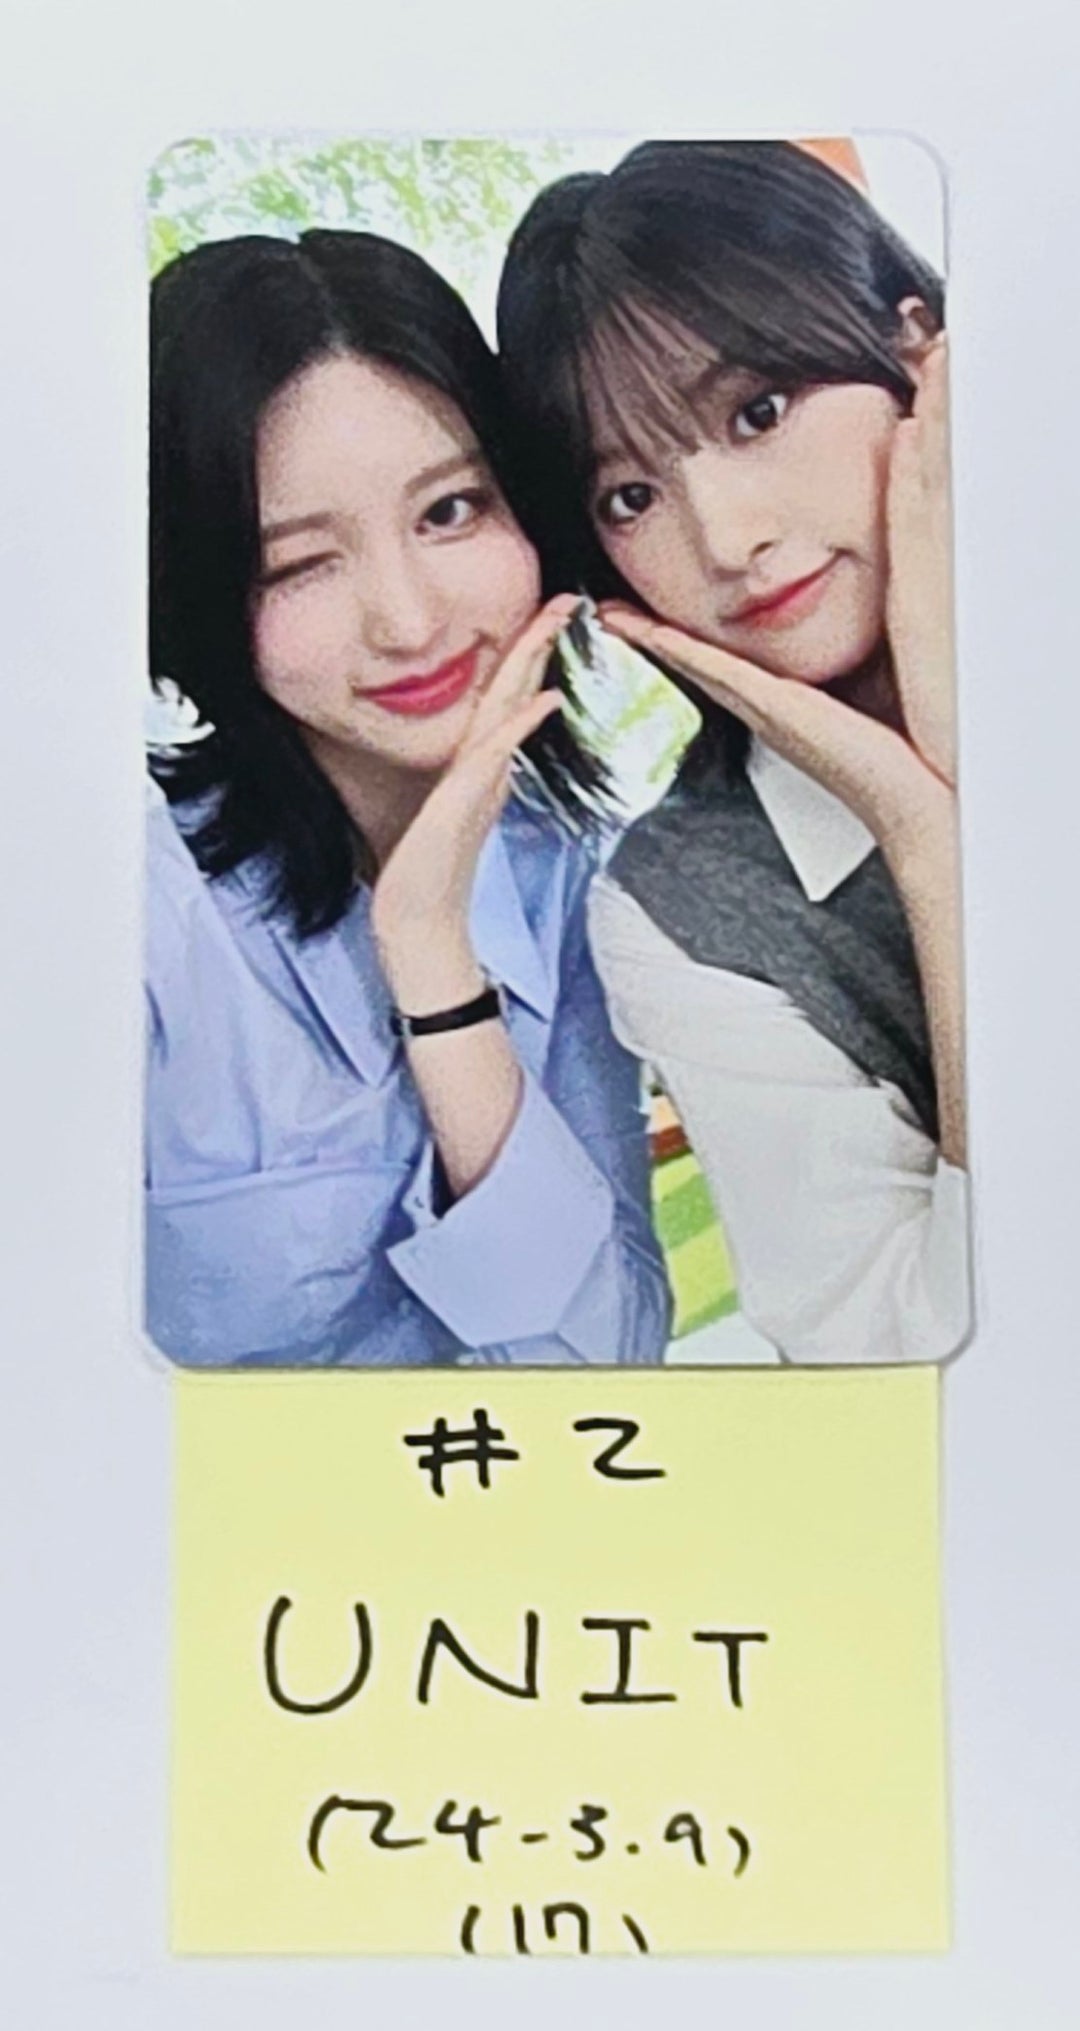 IVE "MAGAZINE IVE" 2024 IVE 2nd Fanmeeting - Official Photocard [24.3.9]